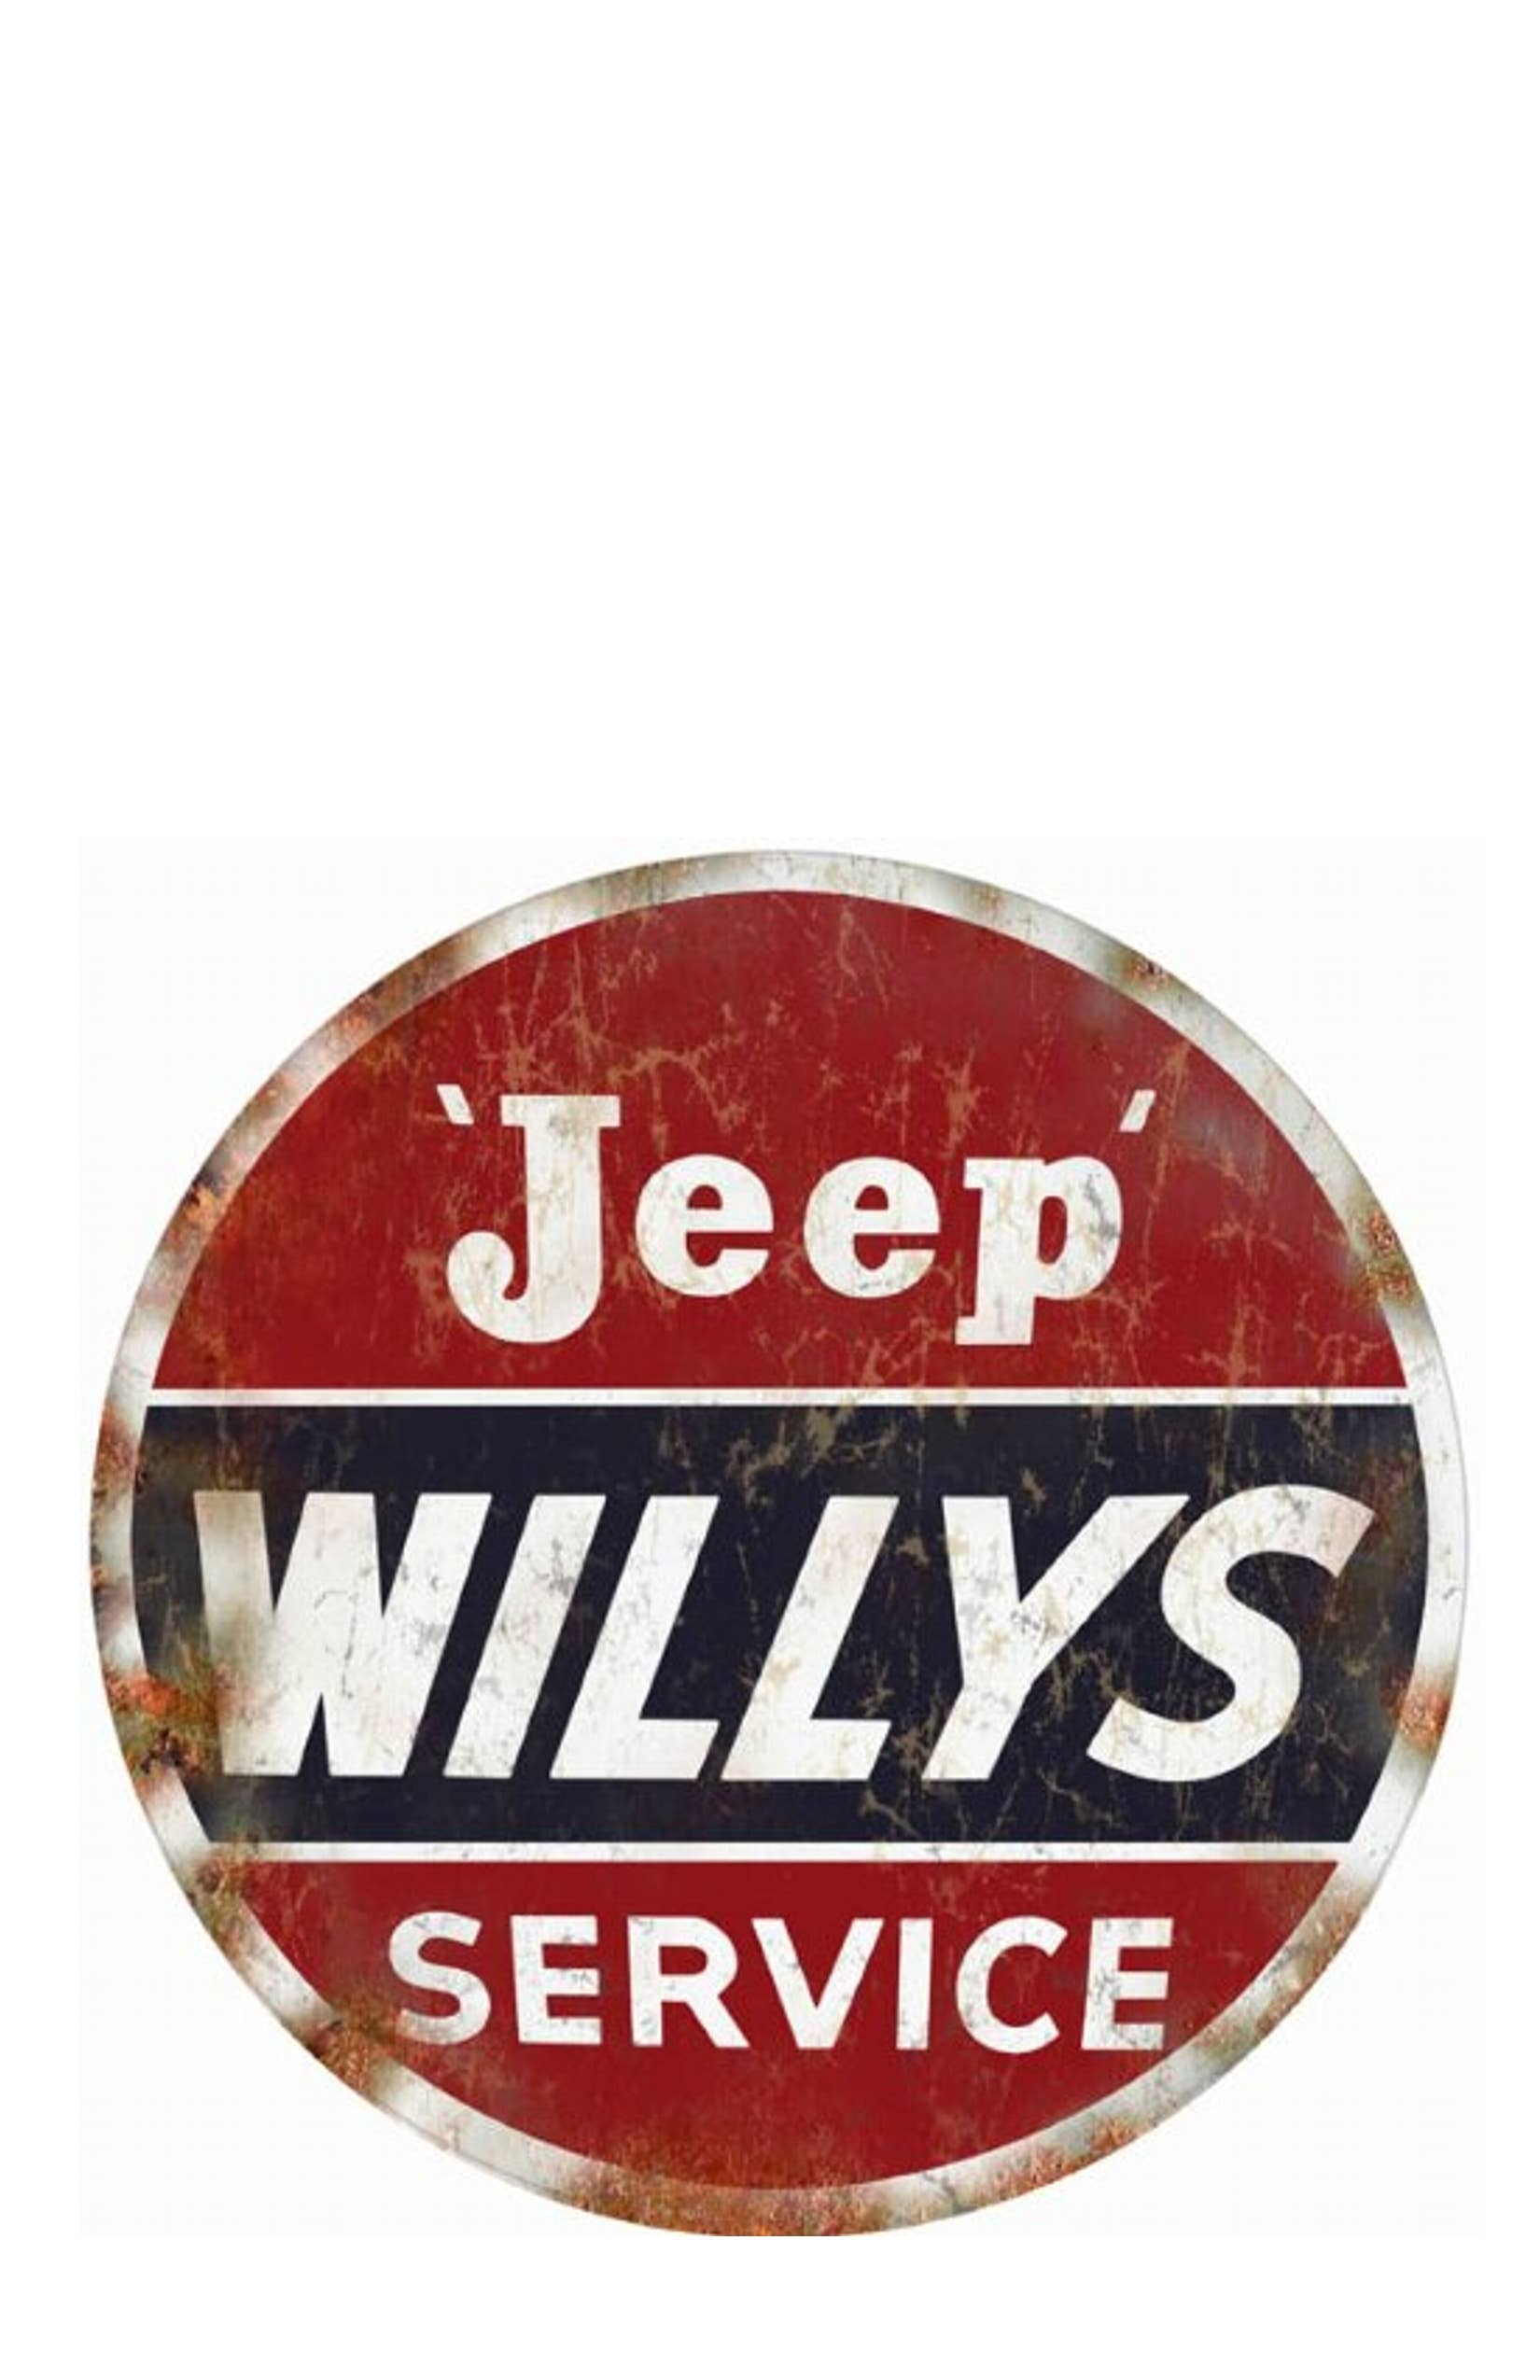 Willys Jeep Service Embroidered Iron-on Patch 3" 